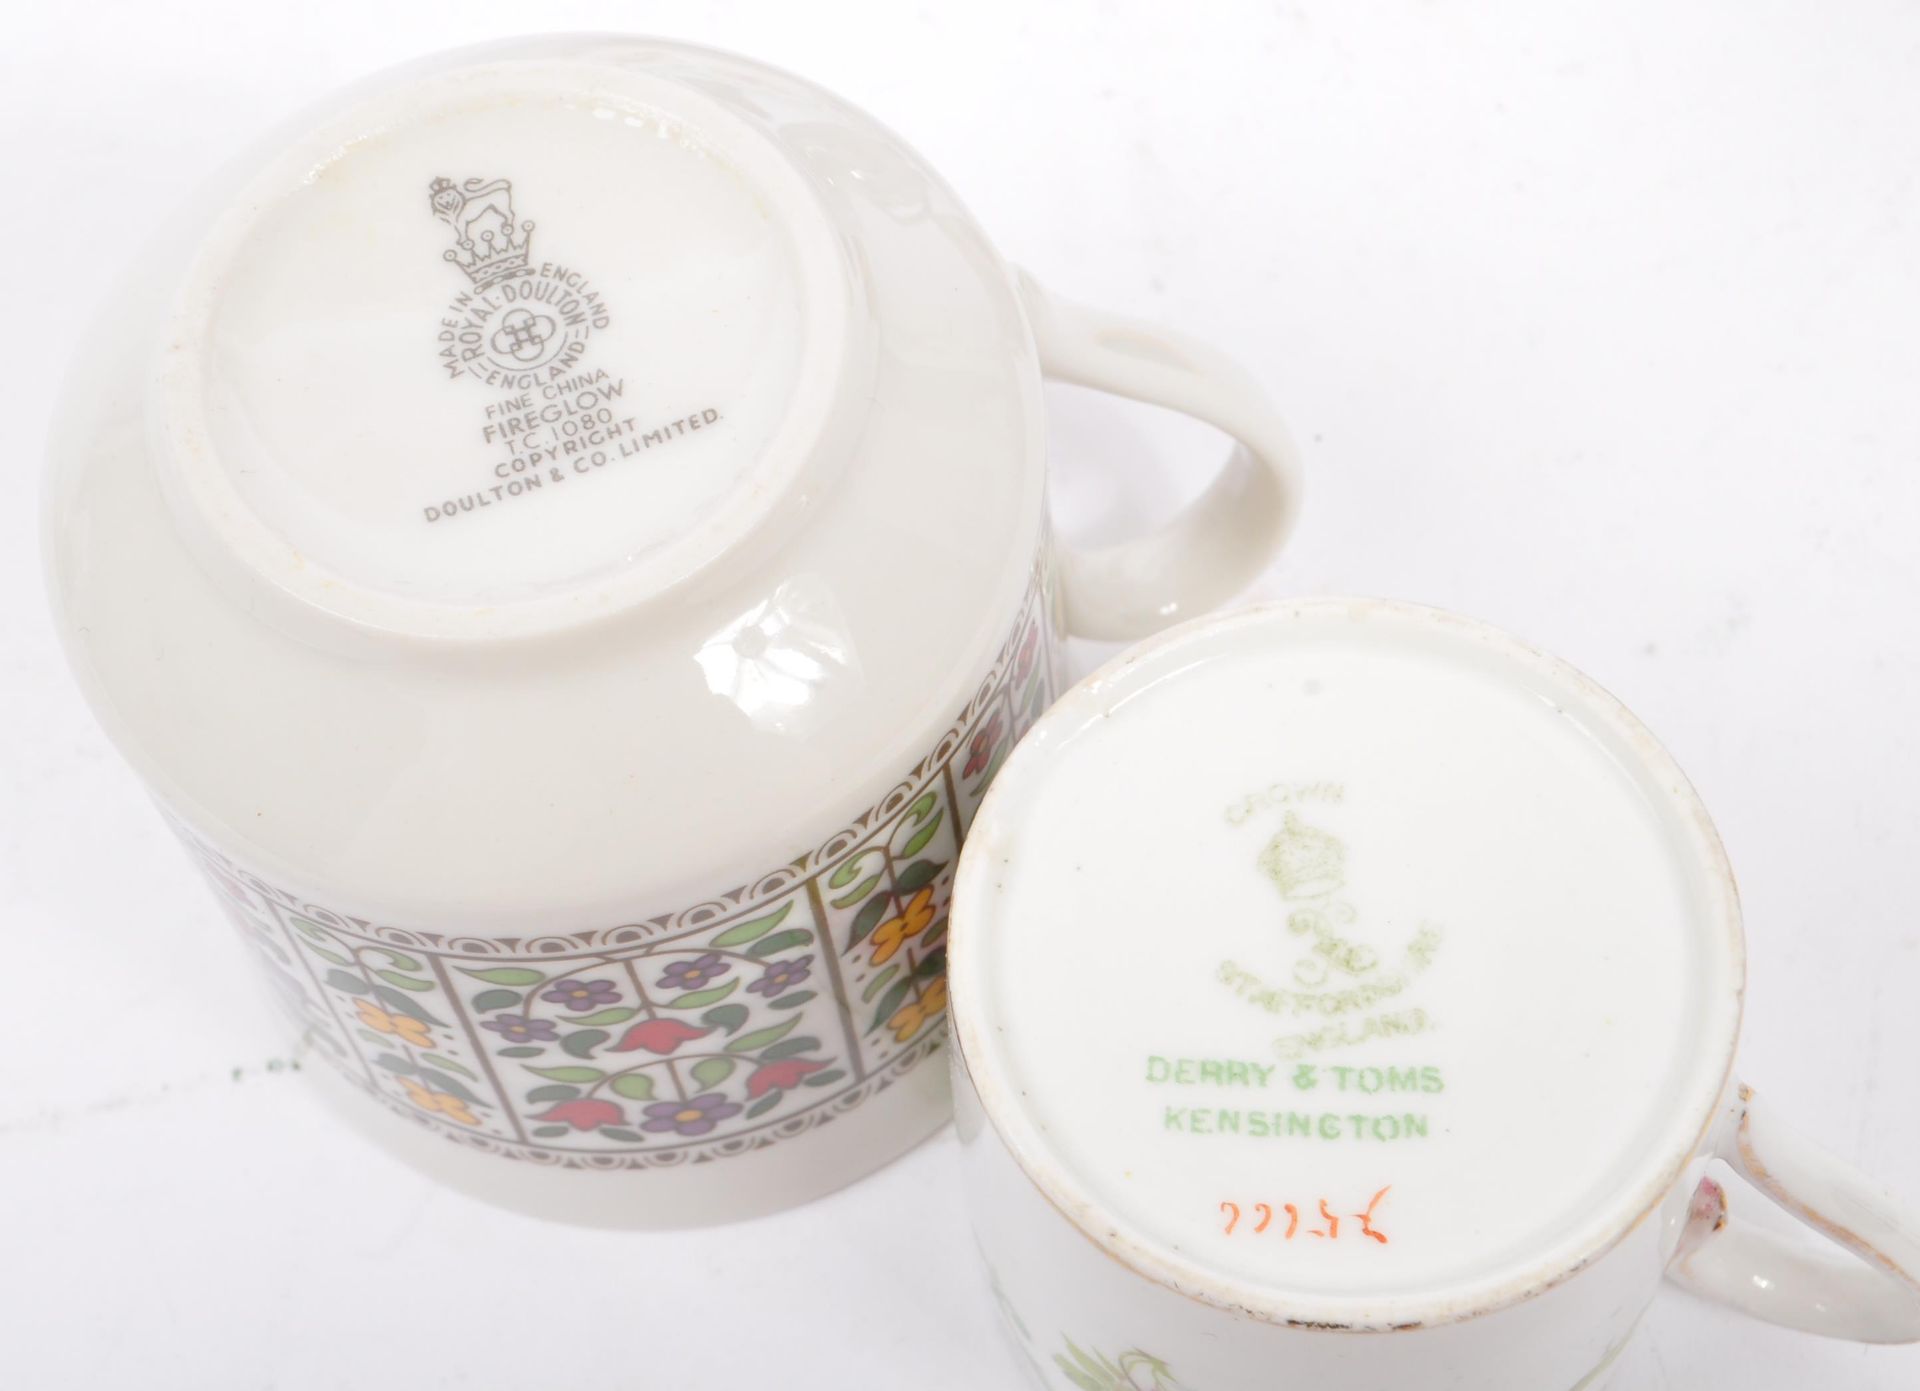 COLLECTION OF EARLY TO MID 20TH CENTURY PORCELAIN CUPS SAUCERS - Image 5 of 10